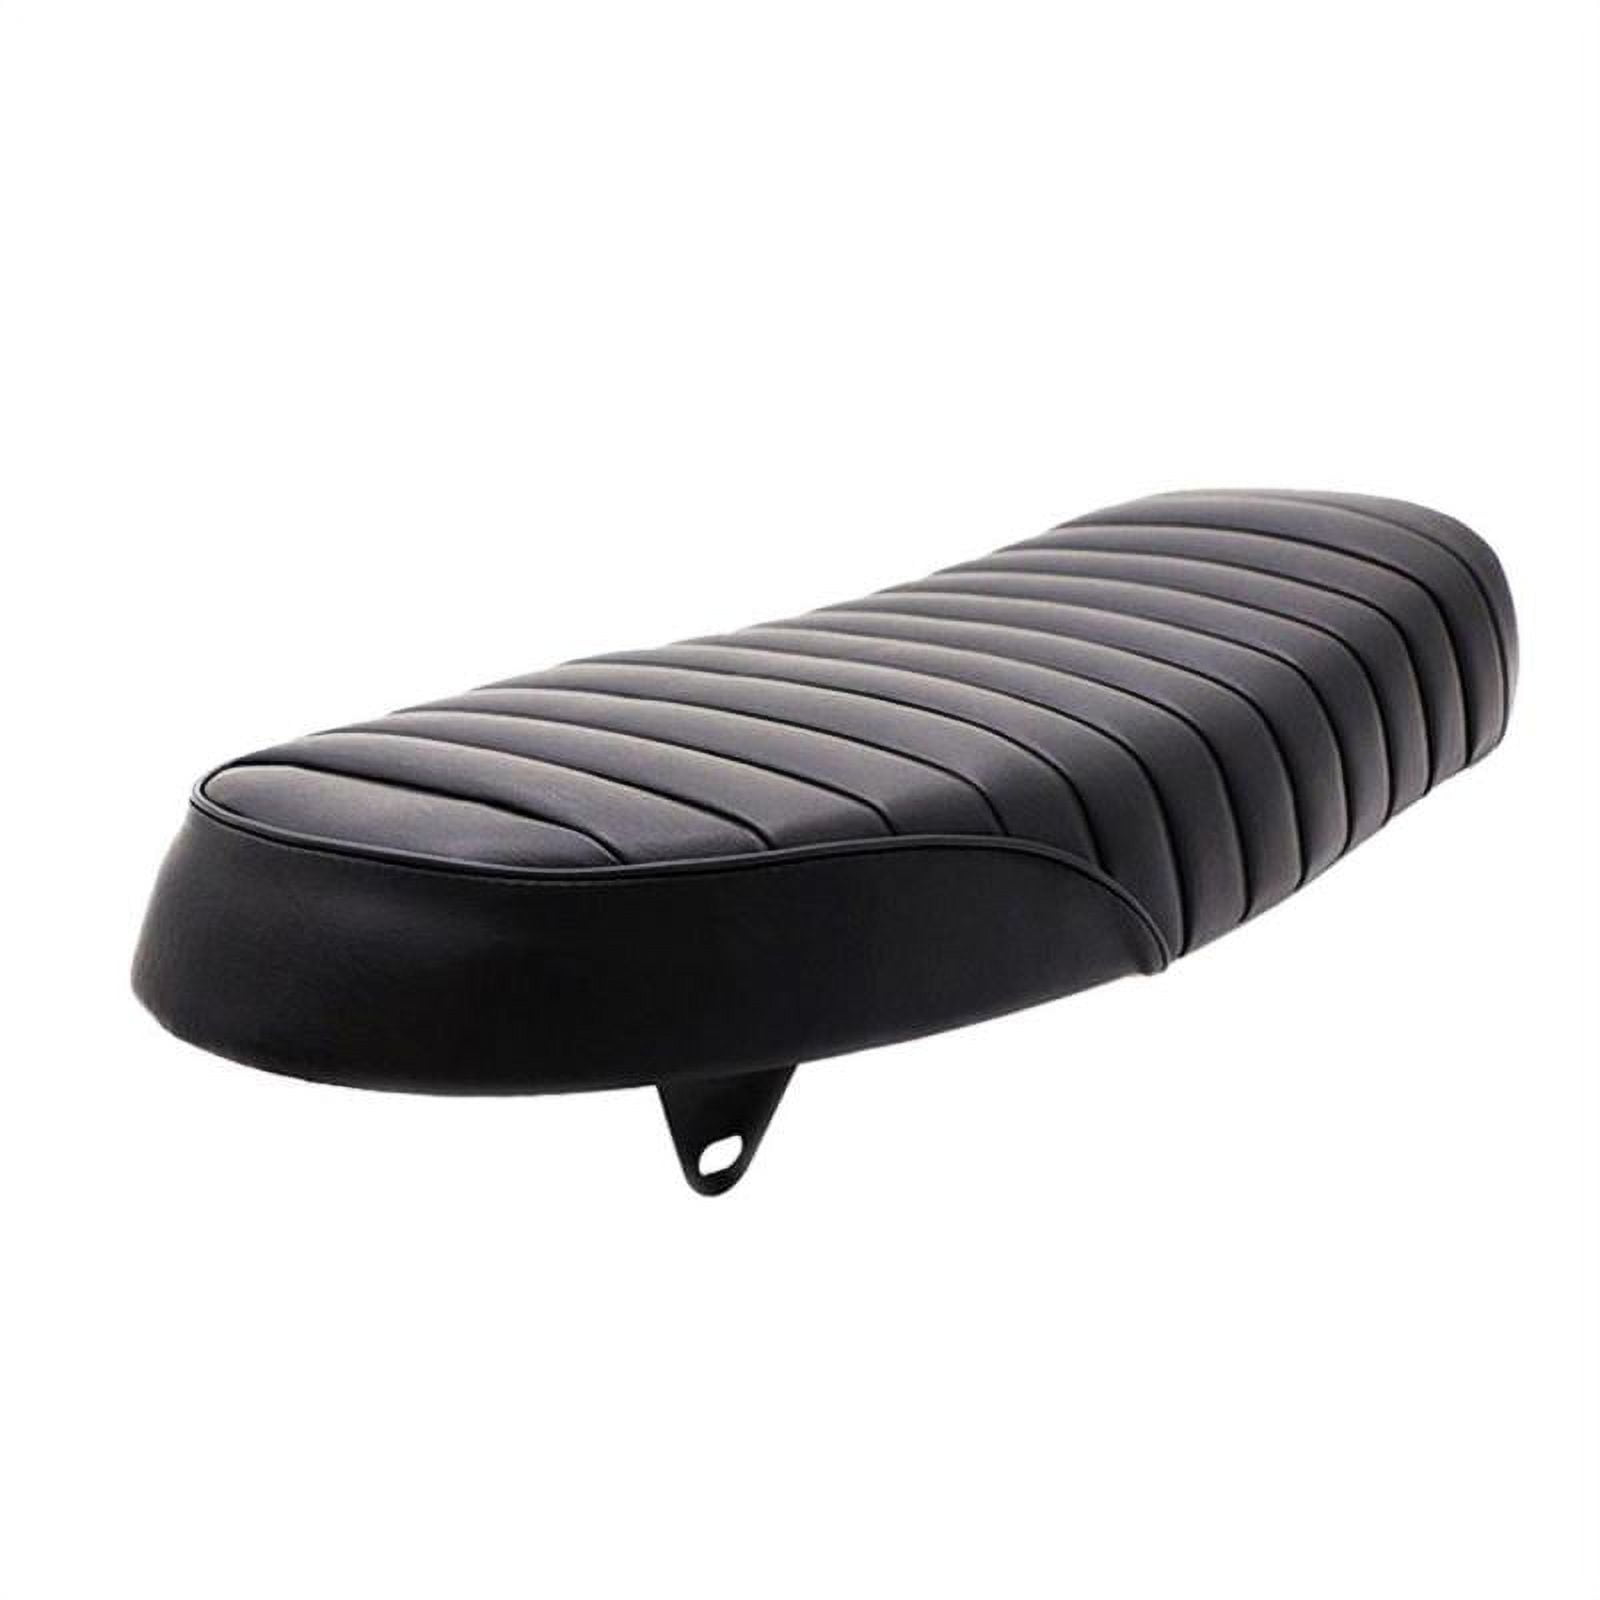 Sport - Classic Motorcycle Cushion